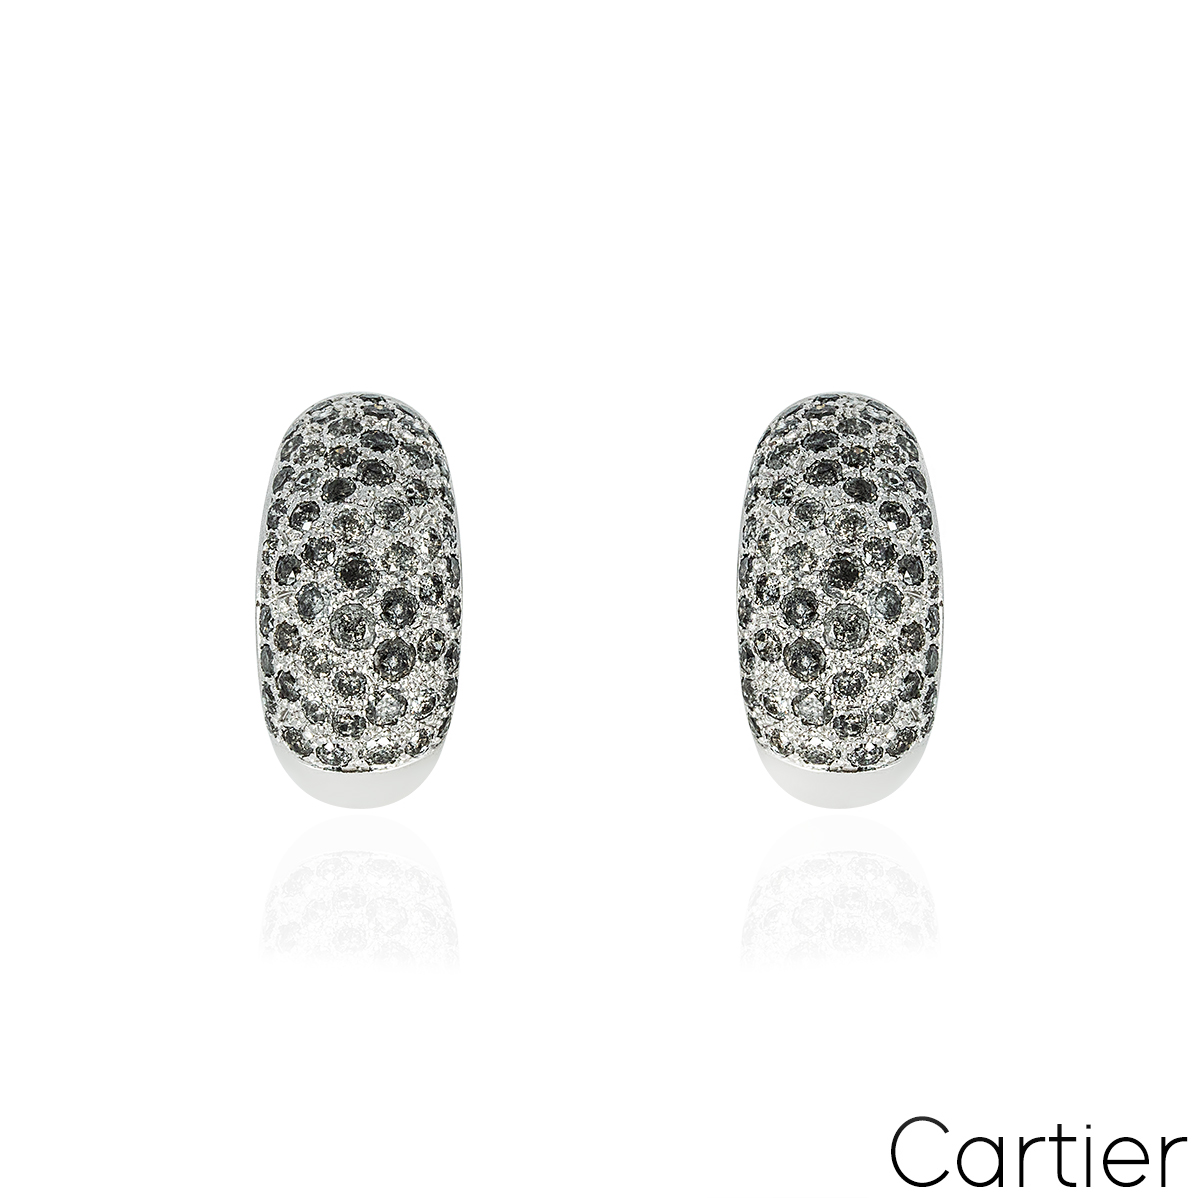 Cartier Sauvage Metissage White Gold Grey Diamond Bombe Earrings